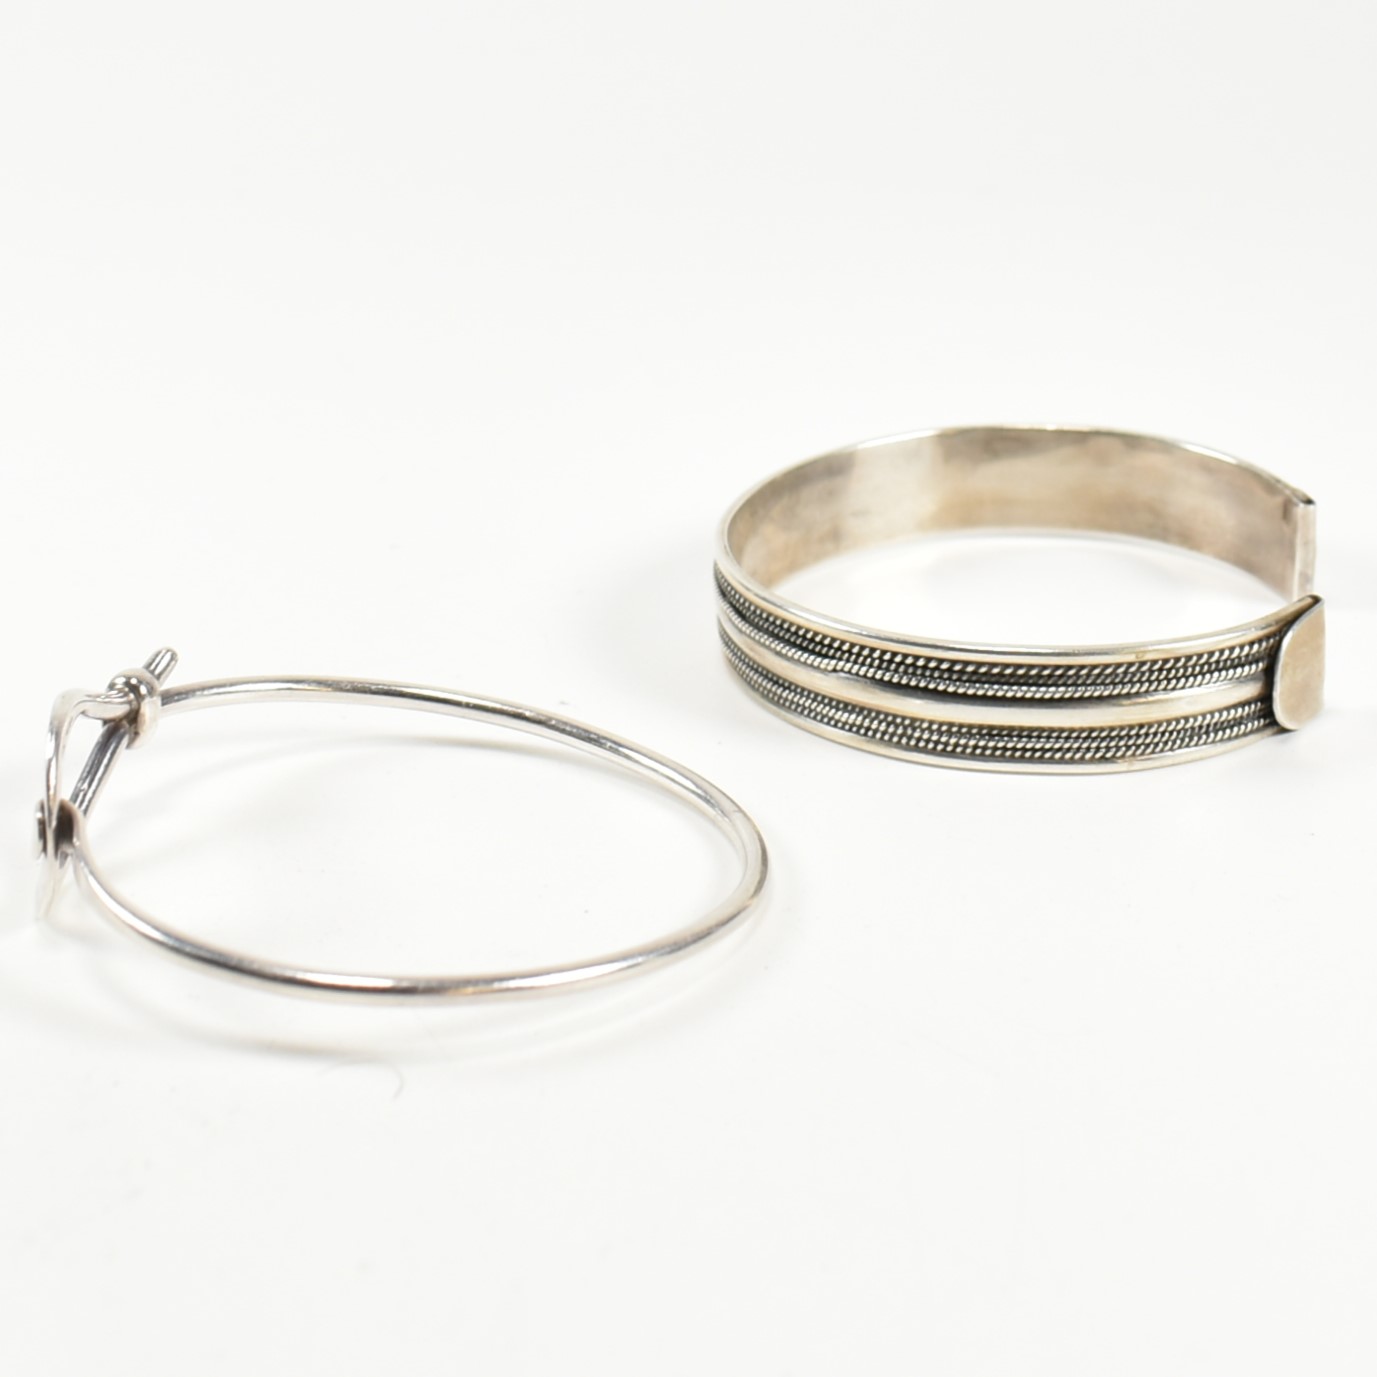 TWO SILVER BANGLES - Image 4 of 6